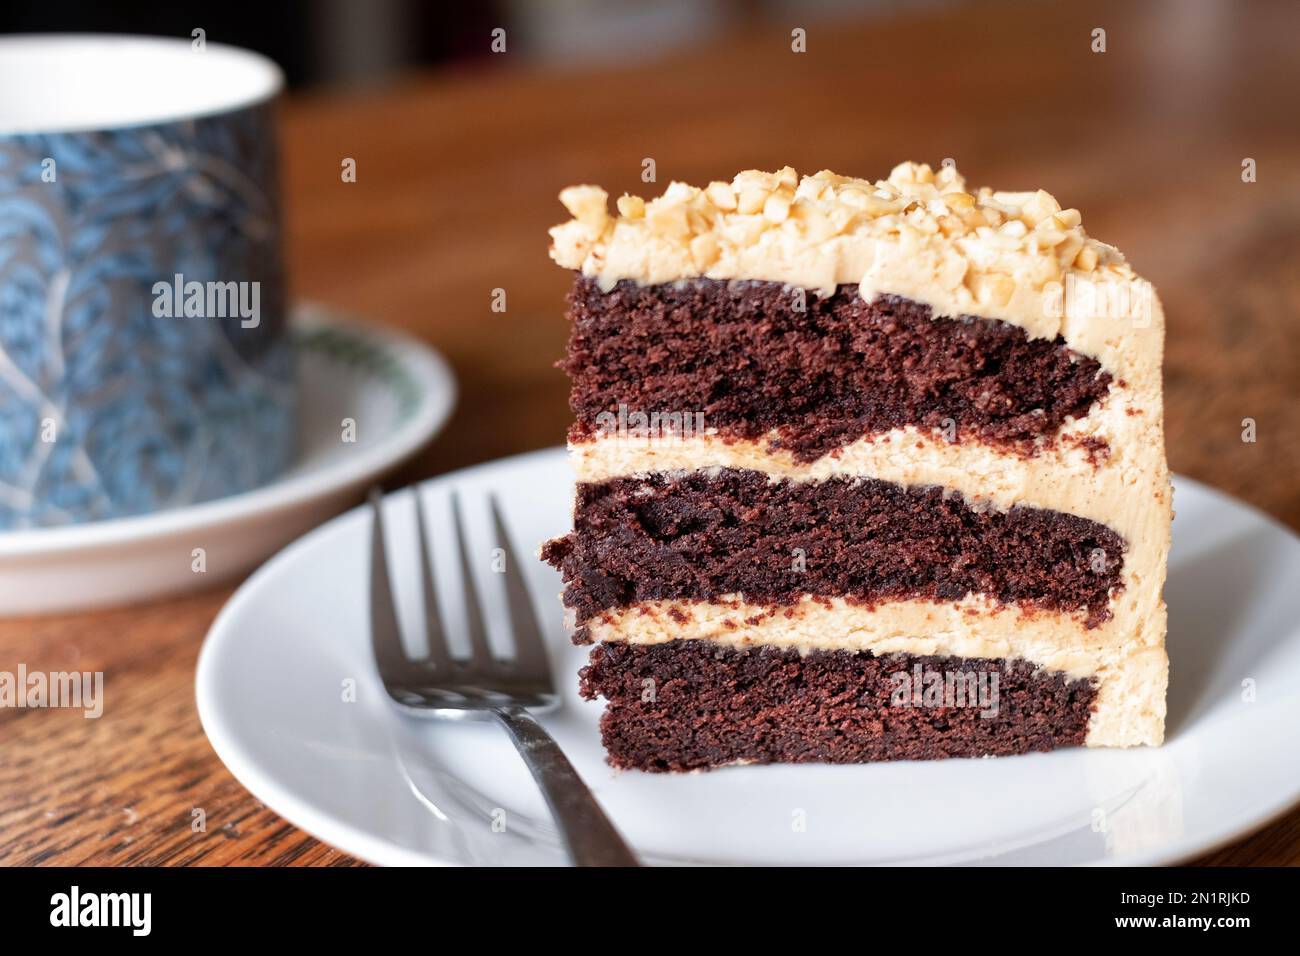 A slice of freshly baked, peanut butter and chocolate cake. The cake has a thick buttercream filling and is served on a side plate with a cup of tea Stock Photo